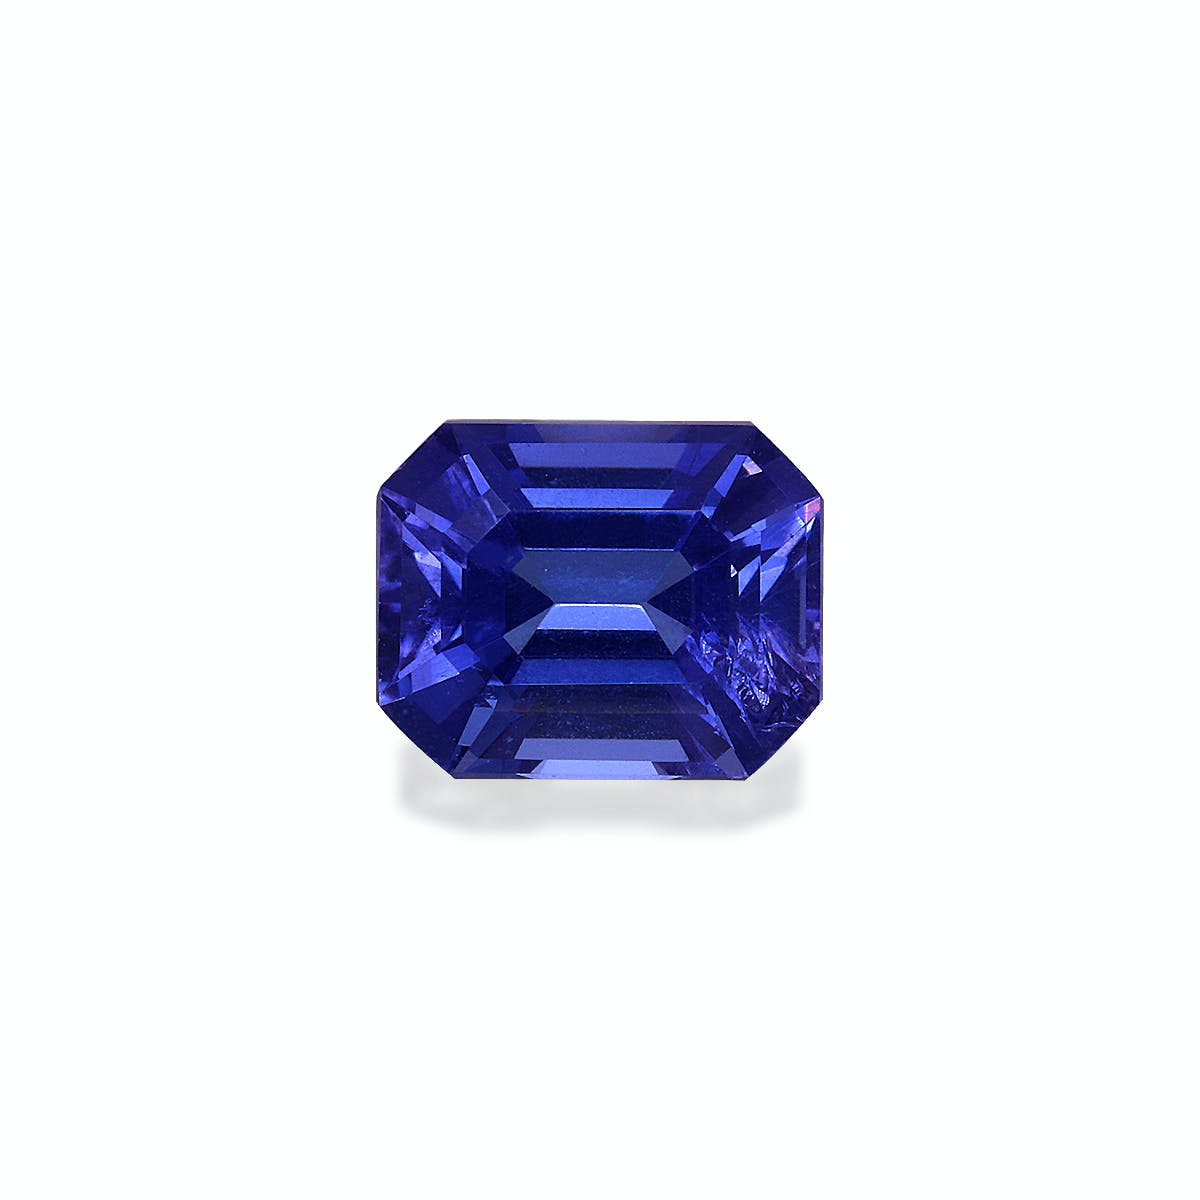 Picture of AAA+ Violet Blue Tanzanite 2.27ct - 8x6mm (TN0568)